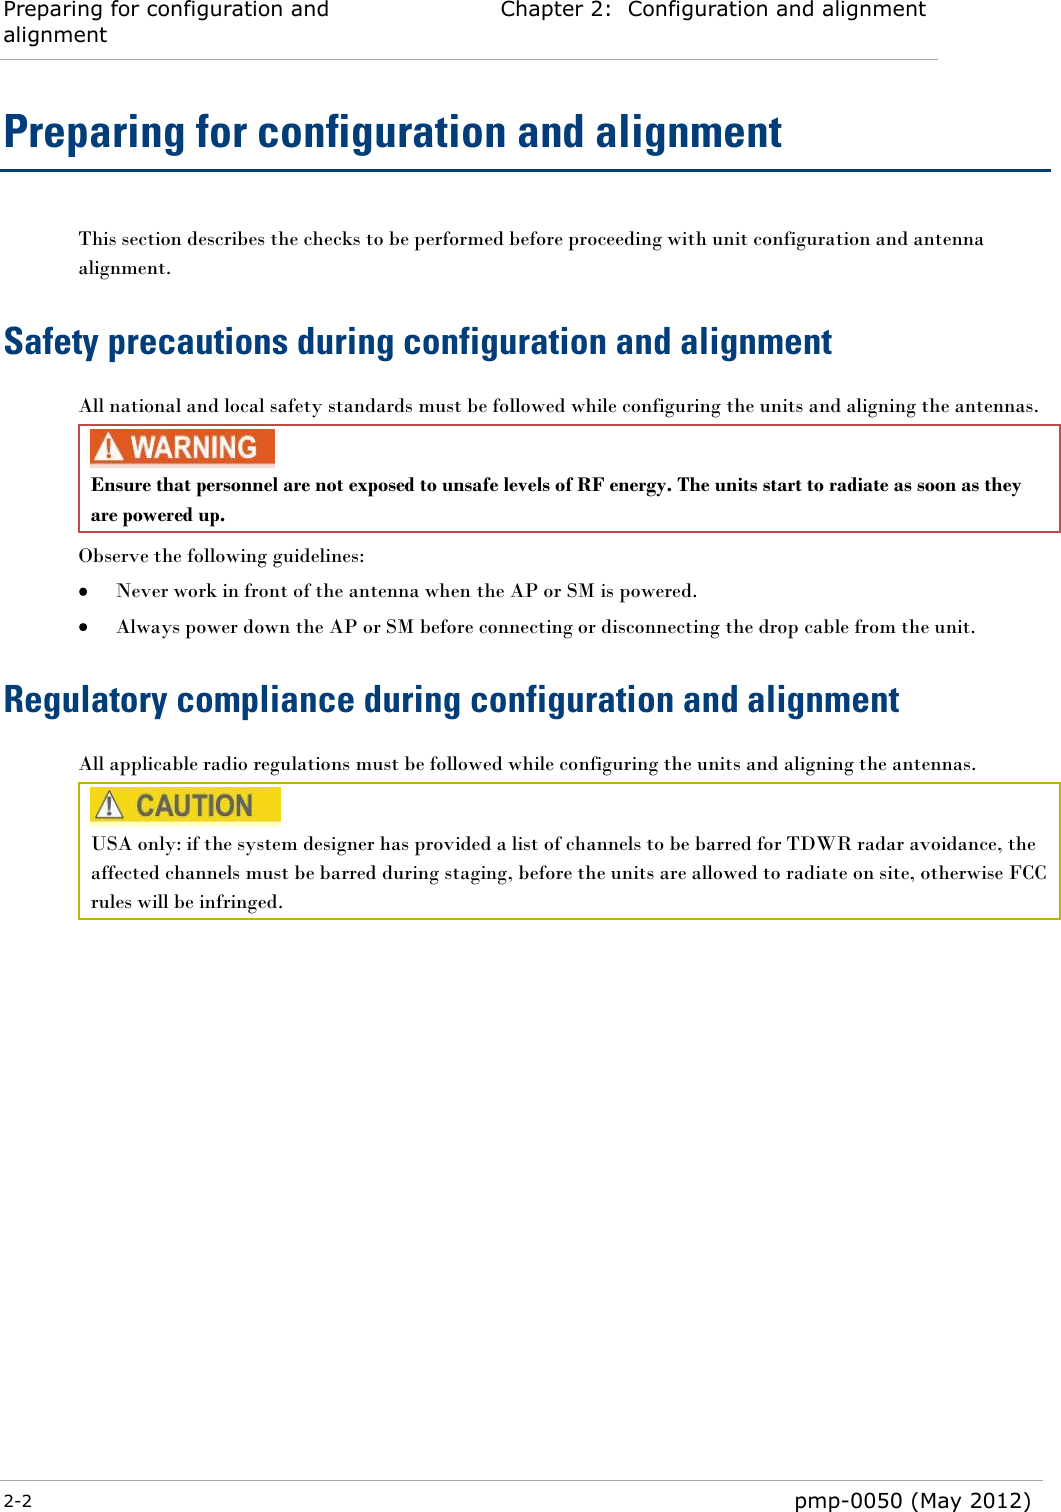 Preparing for configuration and alignment Chapter 2:  Configuration and alignment  2-2  pmp-0050 (May 2012)  Preparing for configuration and alignment This section describes the checks to be performed before proceeding with unit configuration and antenna alignment. Safety precautions during configuration and alignment All national and local safety standards must be followed while configuring the units and aligning the antennas.  Ensure that personnel are not exposed to unsafe levels of RF energy. The units start to radiate as soon as they are powered up.  Observe the following guidelines:  Never work in front of the antenna when the AP or SM is powered.  Always power down the AP or SM before connecting or disconnecting the drop cable from the unit. Regulatory compliance during configuration and alignment All applicable radio regulations must be followed while configuring the units and aligning the antennas.   USA only: if the system designer has provided a list of channels to be barred for TDWR radar avoidance, the affected channels must be barred during staging, before the units are allowed to radiate on site, otherwise FCC rules will be infringed.  